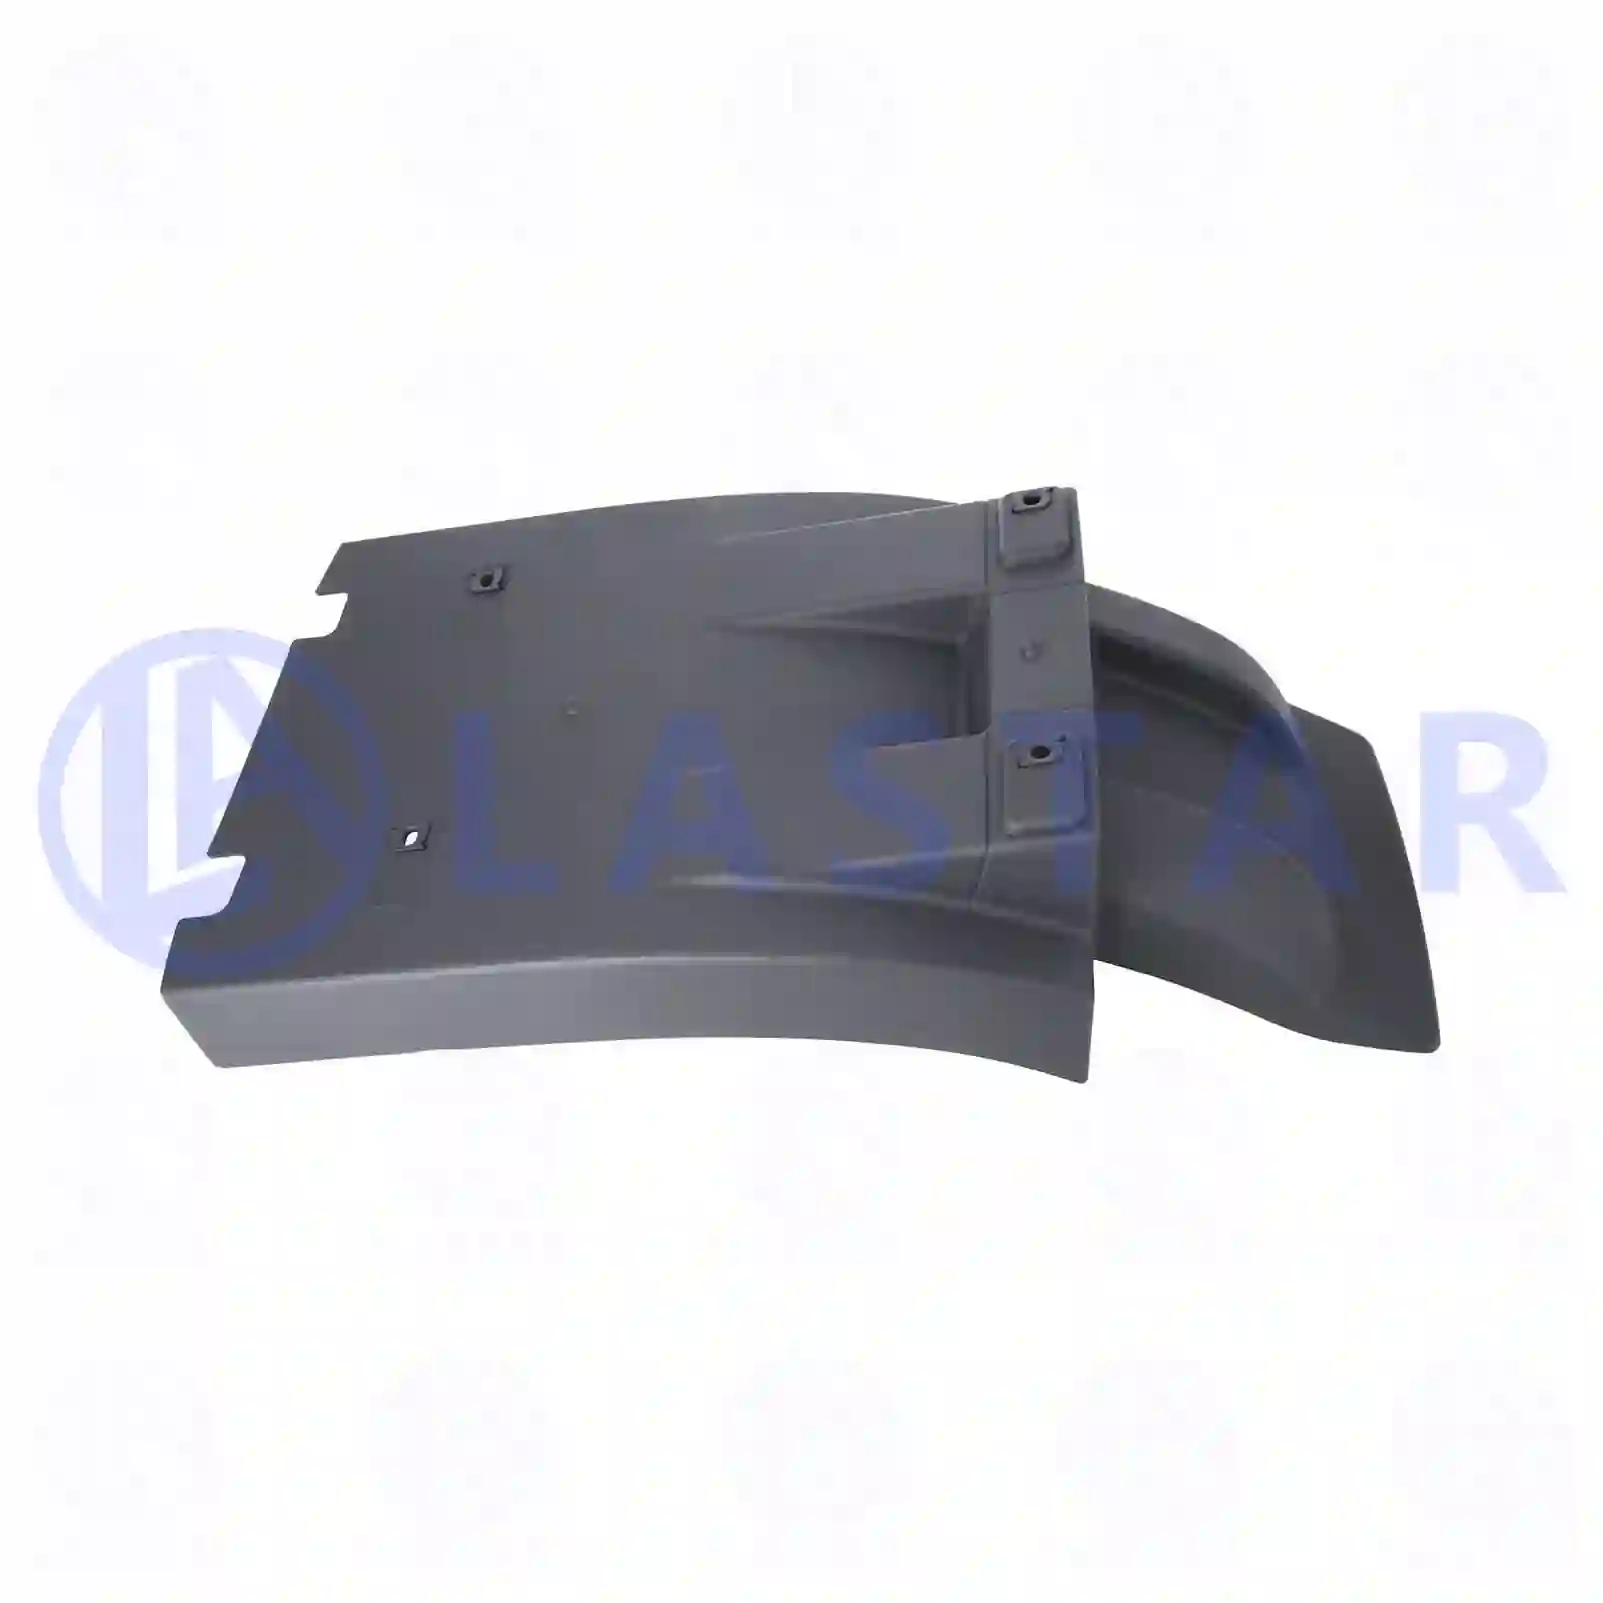 Fender, front, right, 77721147, 82637711, 8400749 ||  77721147 Lastar Spare Part | Truck Spare Parts, Auotomotive Spare Parts Fender, front, right, 77721147, 82637711, 8400749 ||  77721147 Lastar Spare Part | Truck Spare Parts, Auotomotive Spare Parts